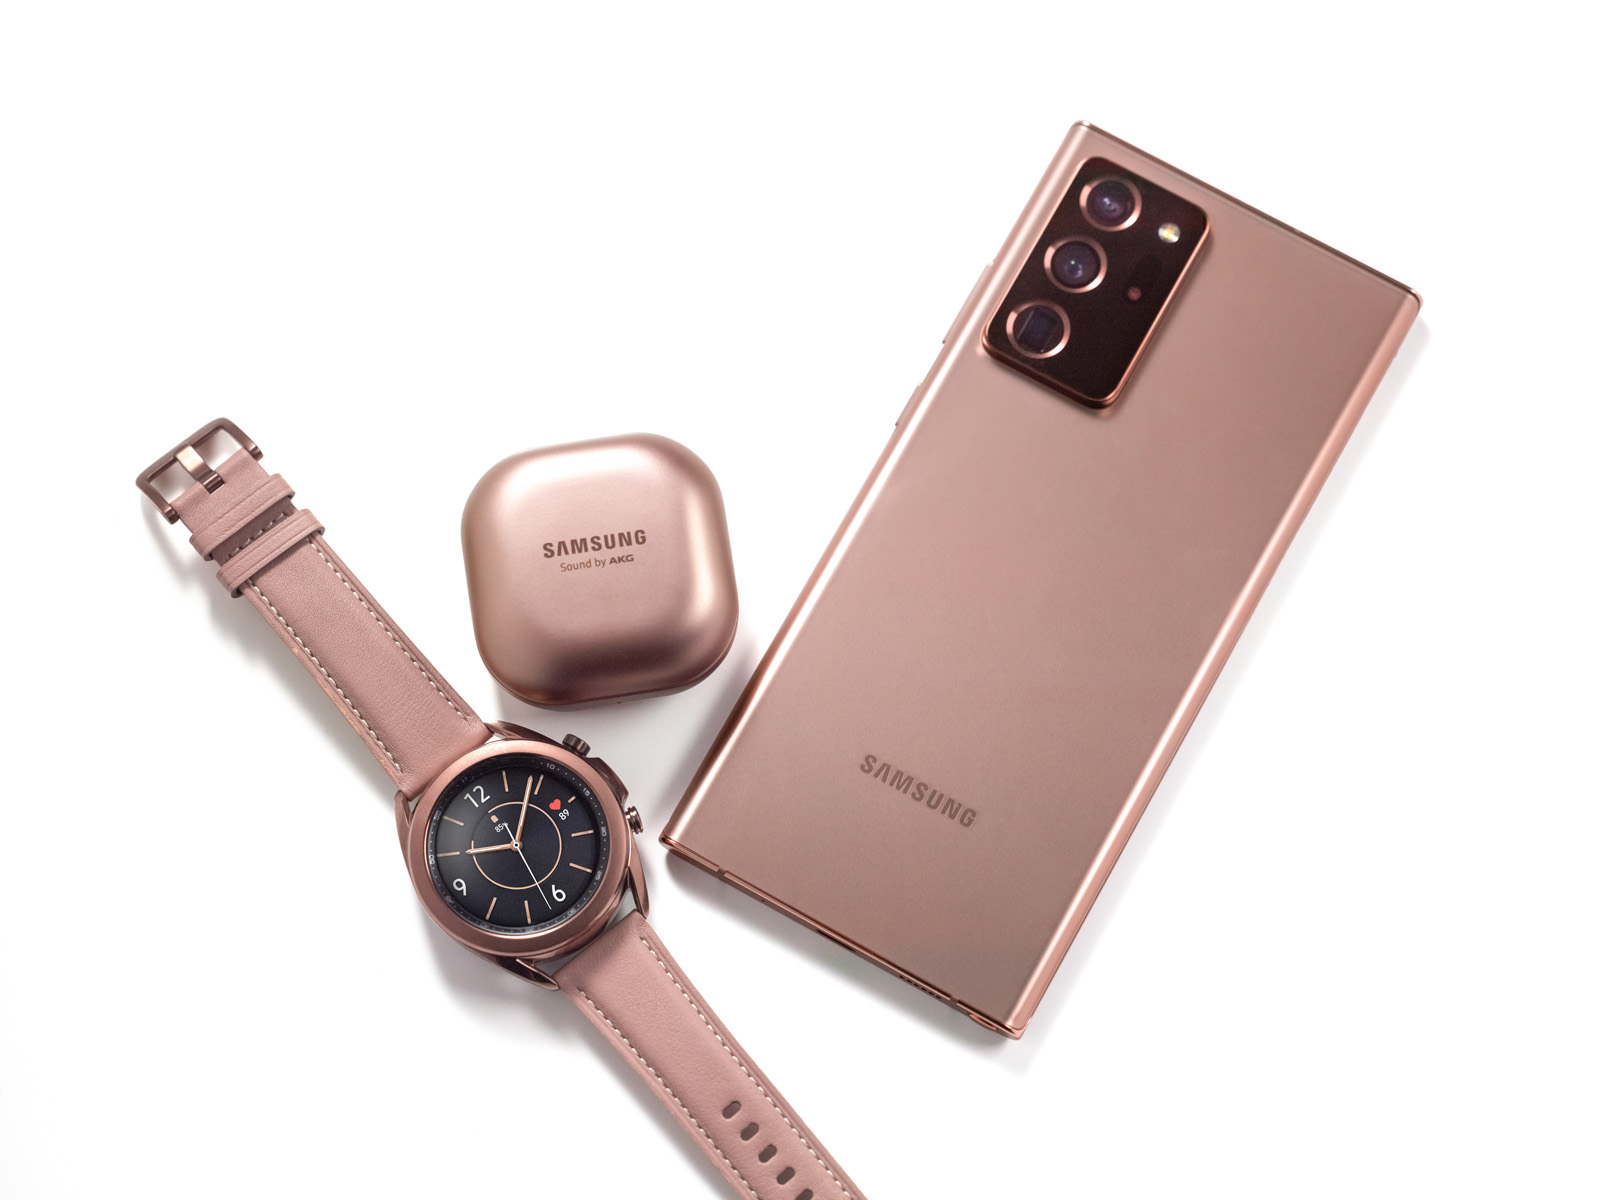 Galaxy Note20 Ultra, Galaxy Watch3 and Galaxy Buds Live in Mystic Bronze on white surface.